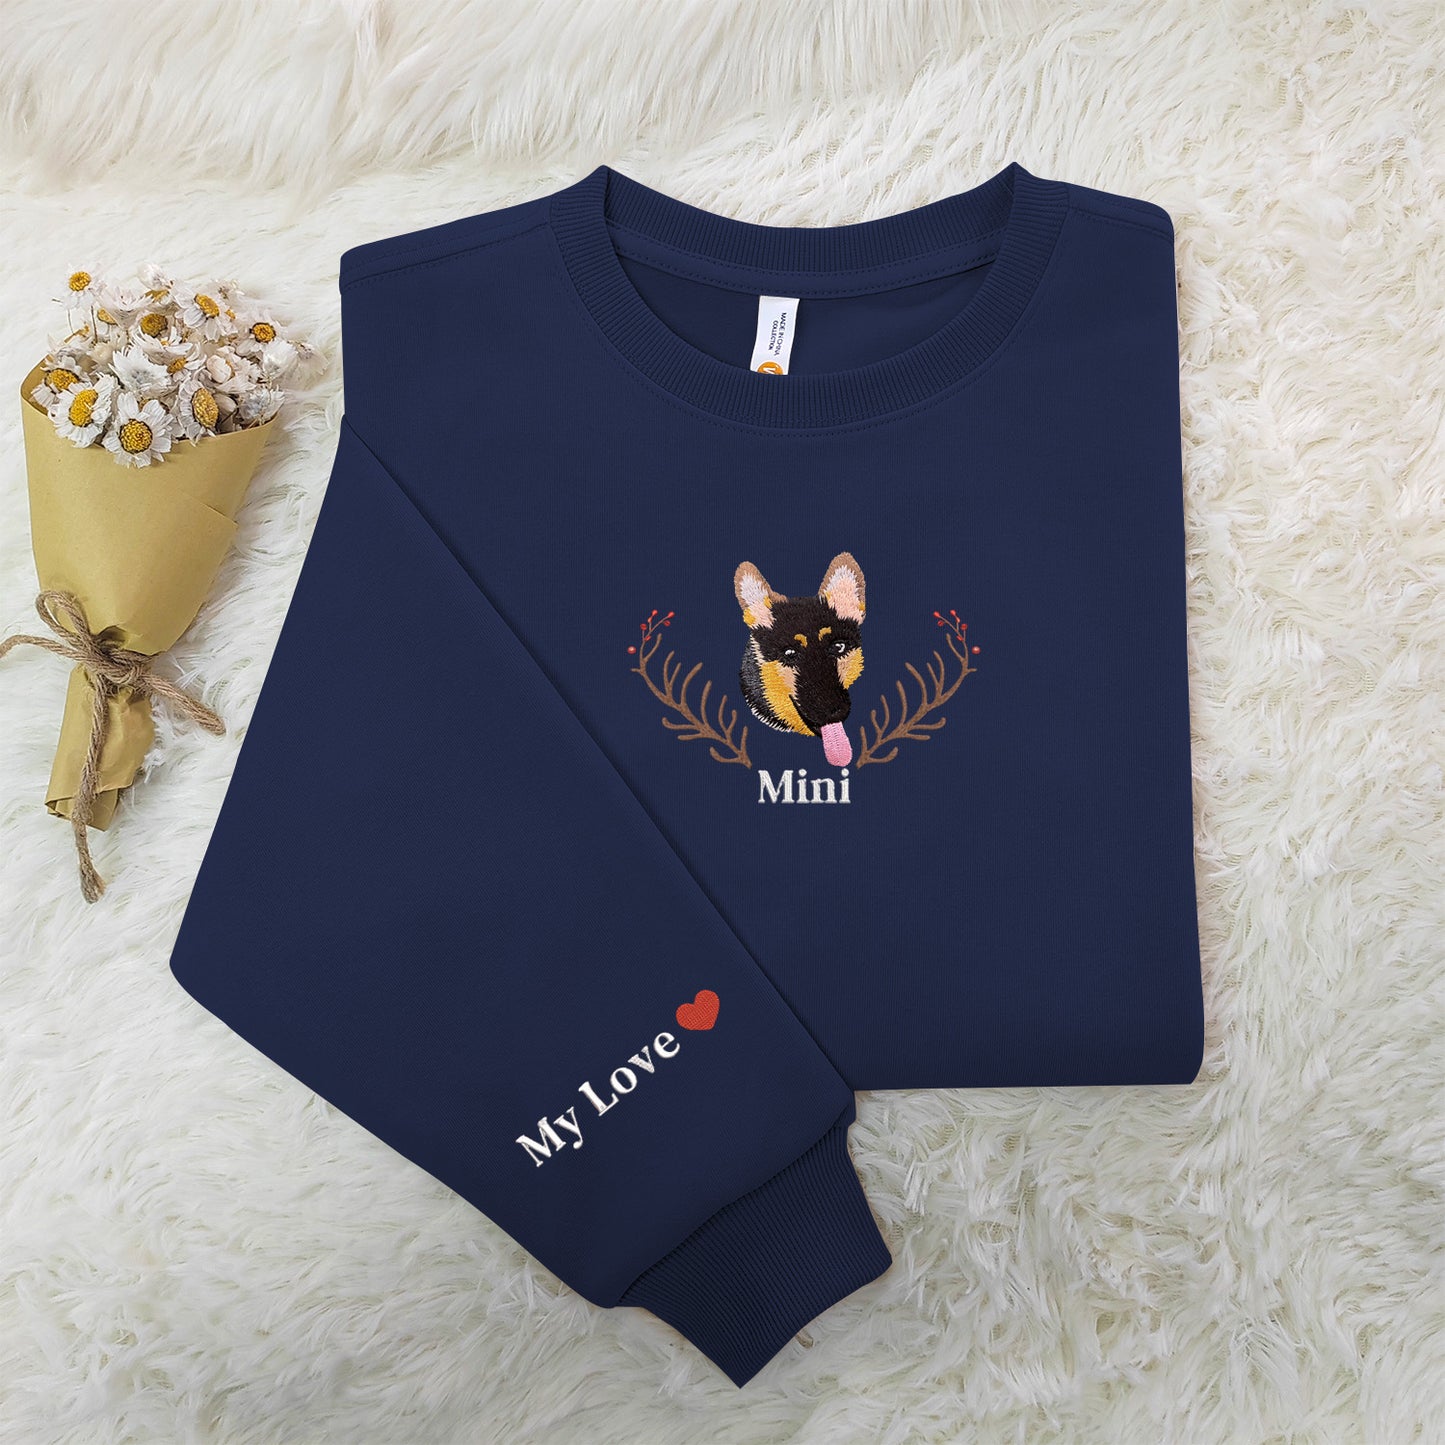 Personalized Pup Embroidered Sweatshirts - Stay Cozy and Cute